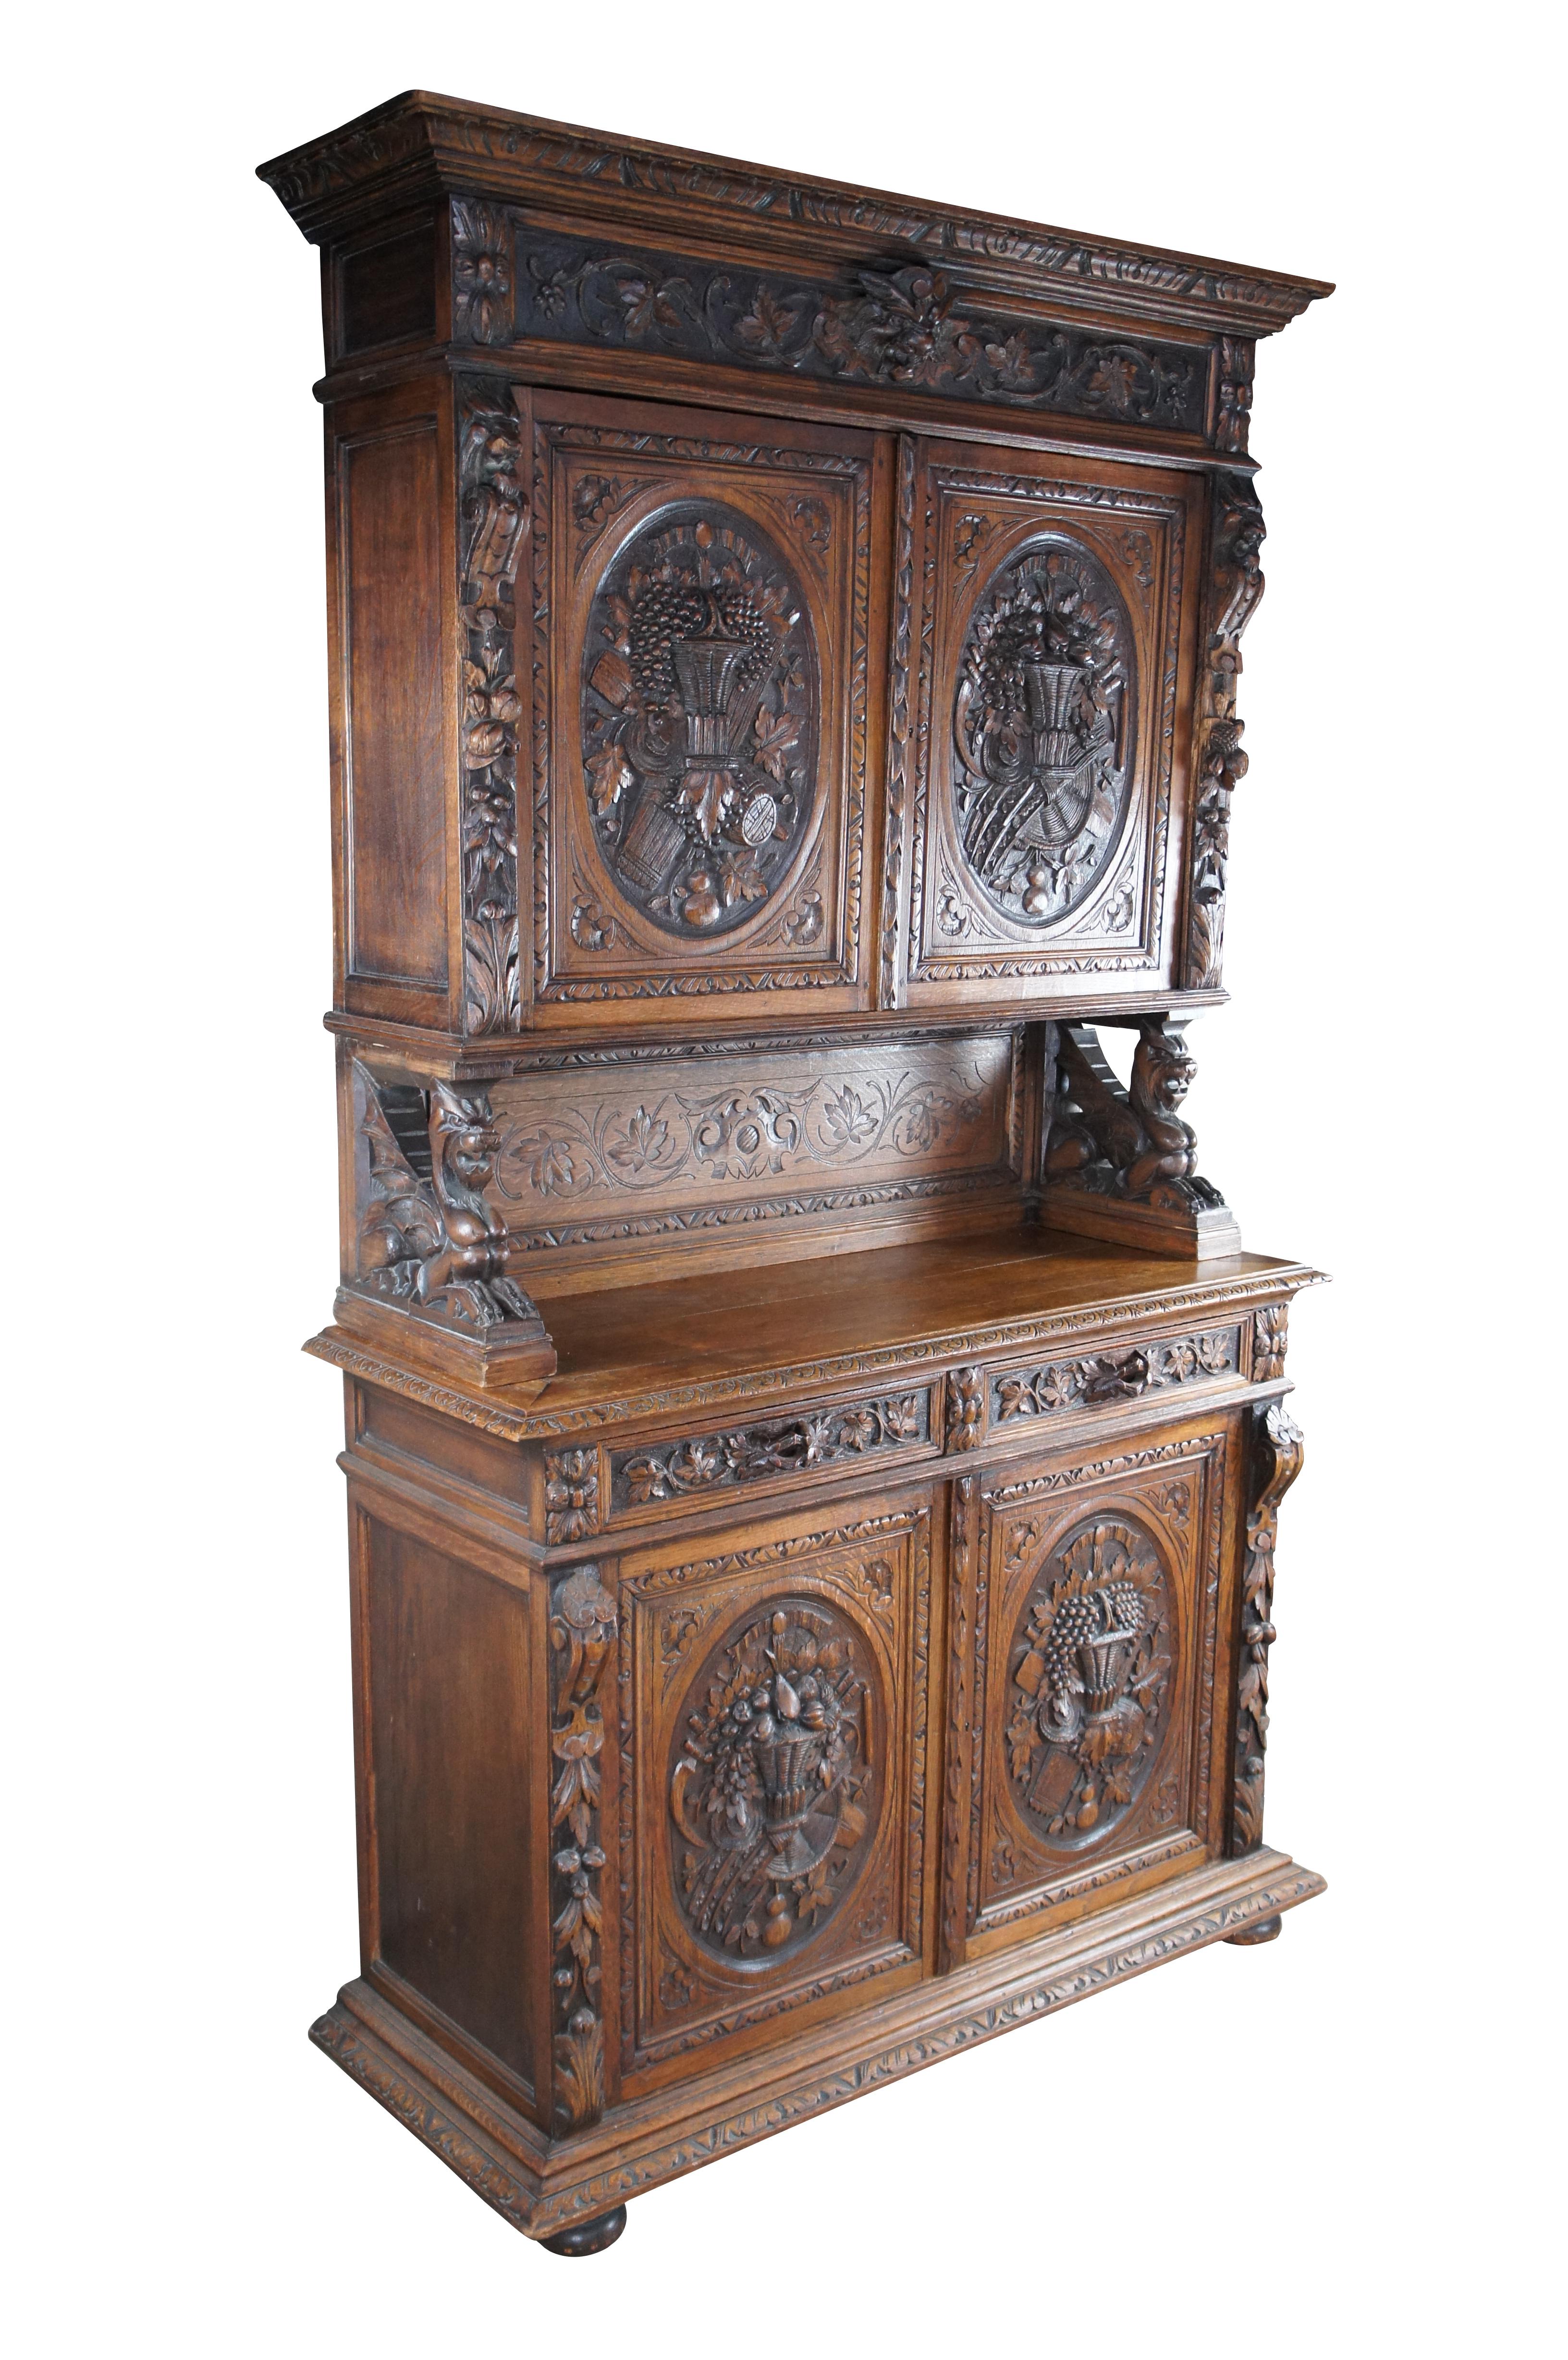 Exceptional Antique 19th Century Renaissance Revival Hunt Cabinet. Hand carved from oak with an upper display portion raised over a figural griffon carved backsplash. Features low relief carved doors with neoclassical motifs showcasing a basket of